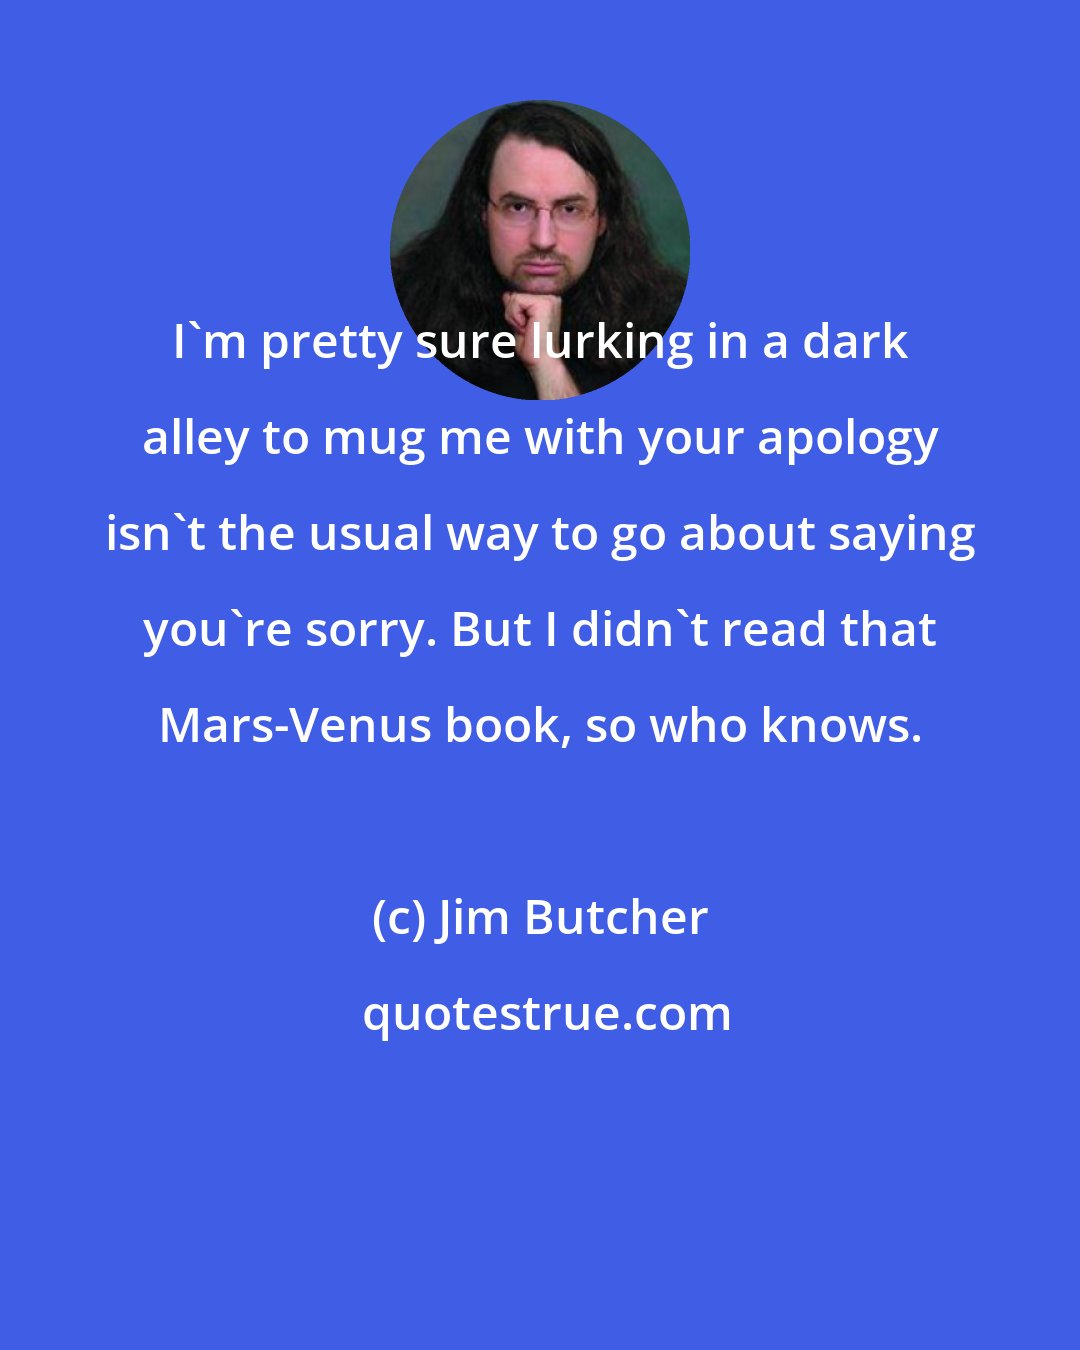 Jim Butcher: I'm pretty sure lurking in a dark alley to mug me with your apology isn't the usual way to go about saying you're sorry. But I didn't read that Mars-Venus book, so who knows.